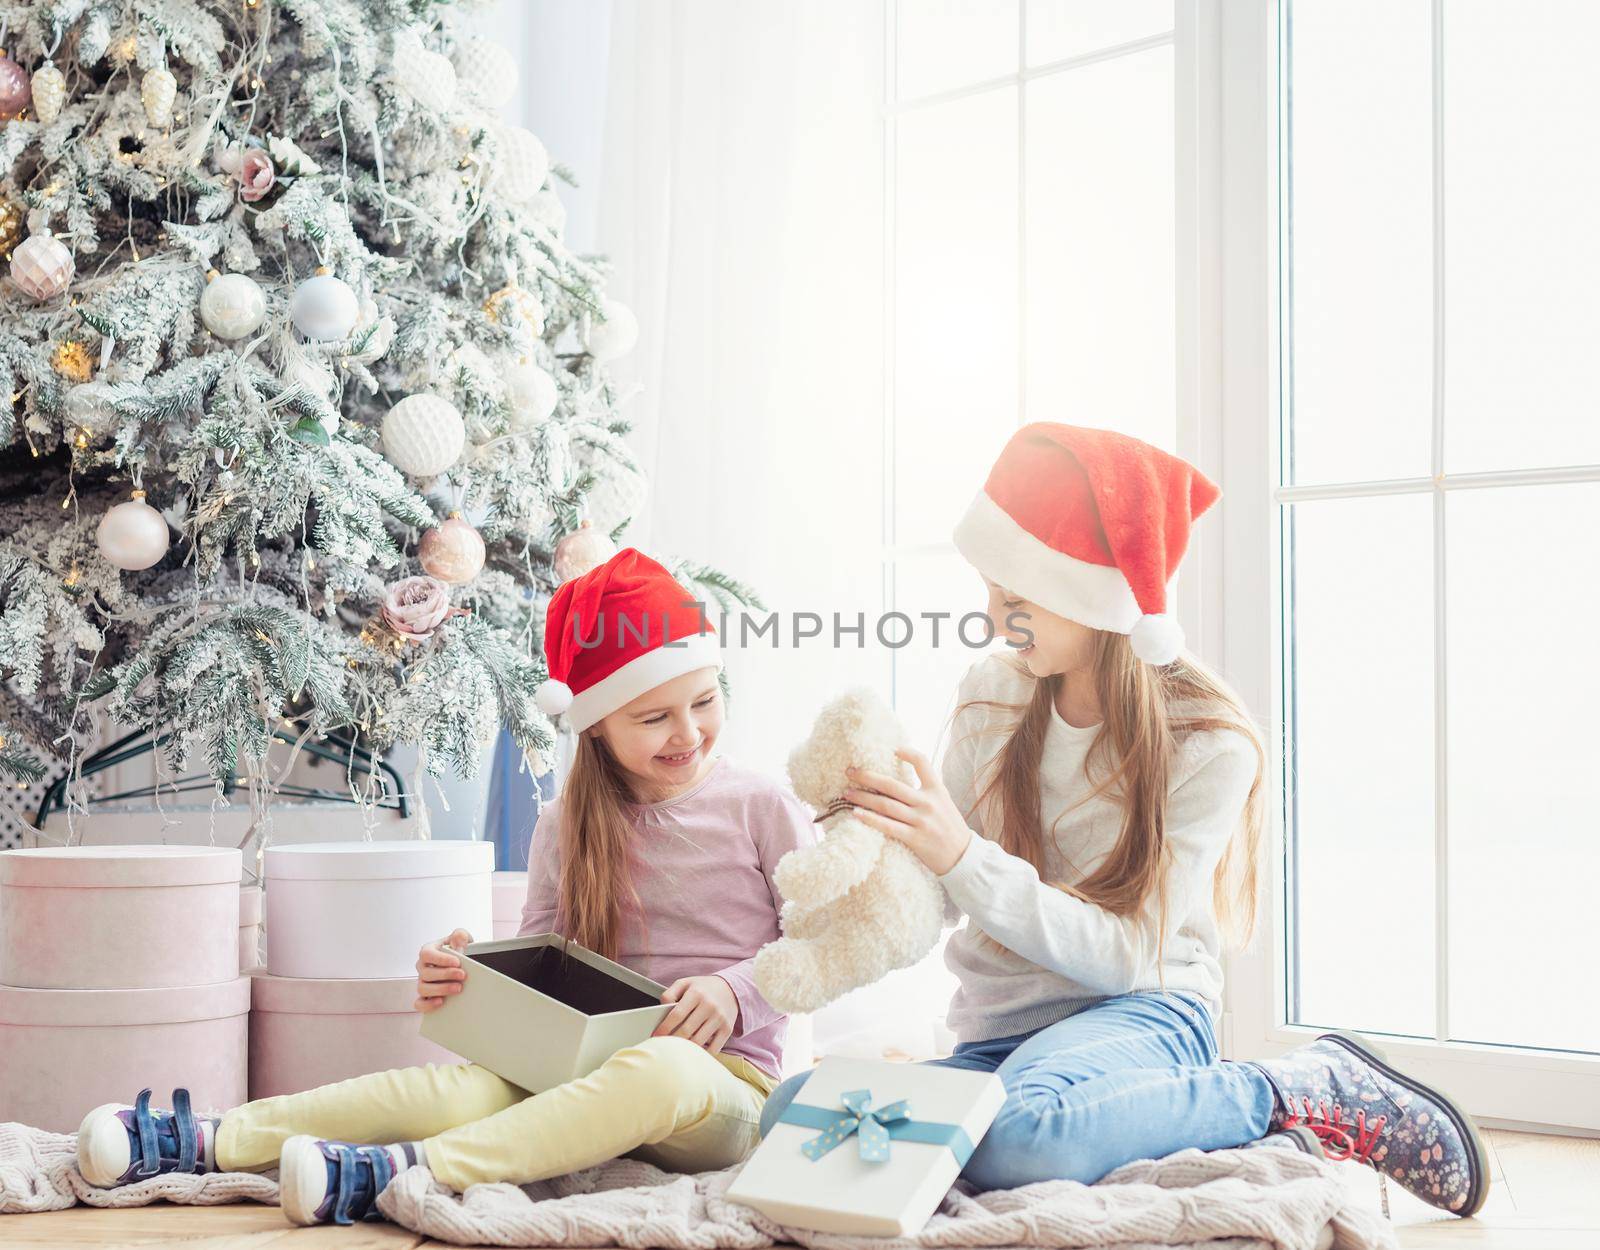 Smiling sisters taking opened gifts by tan4ikk1